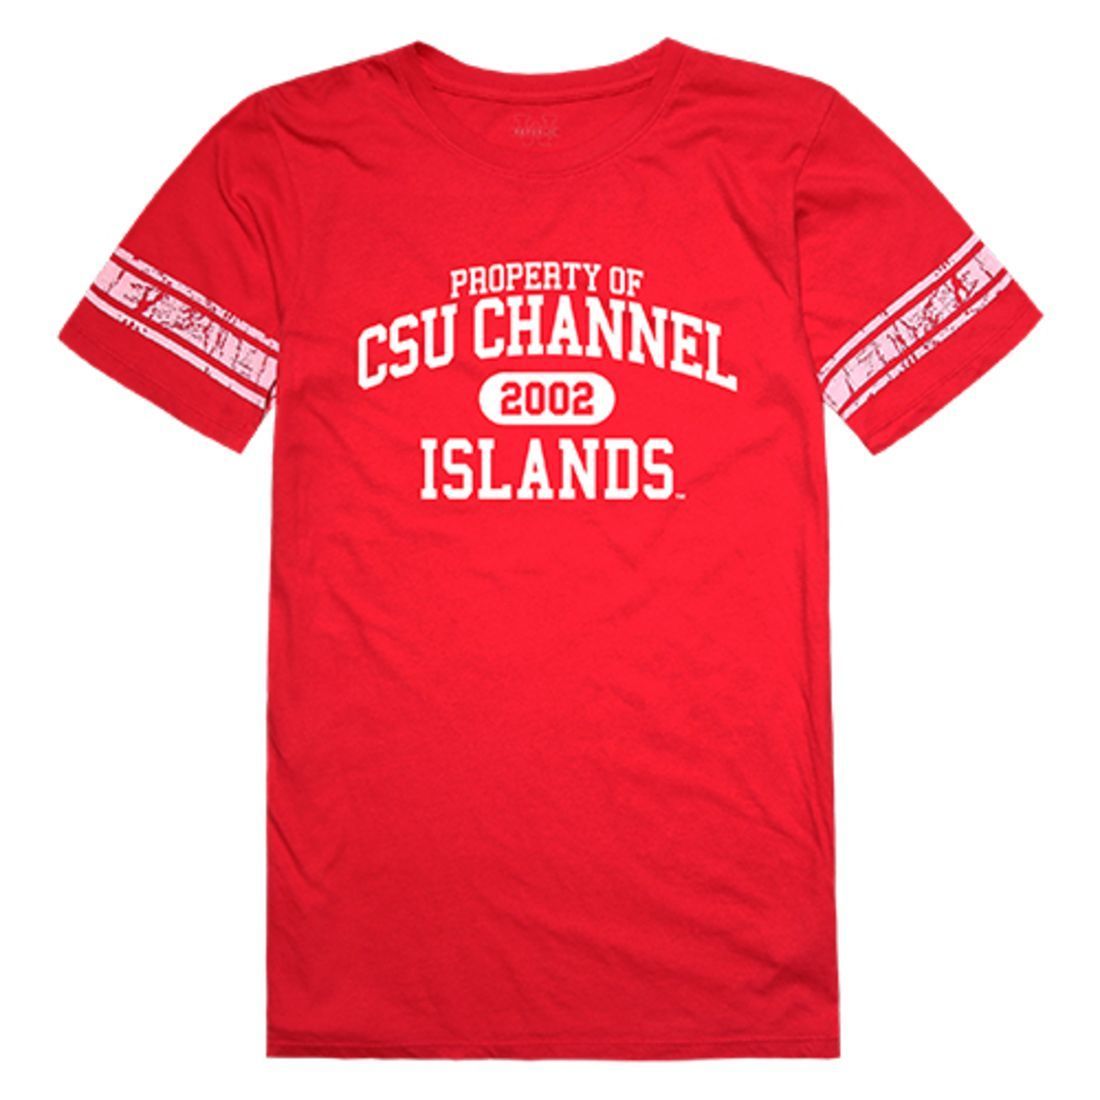 W Republic CSUCI California State University Channel Islands The Dolphins Womens Property Tee T-Shirt Red, Small